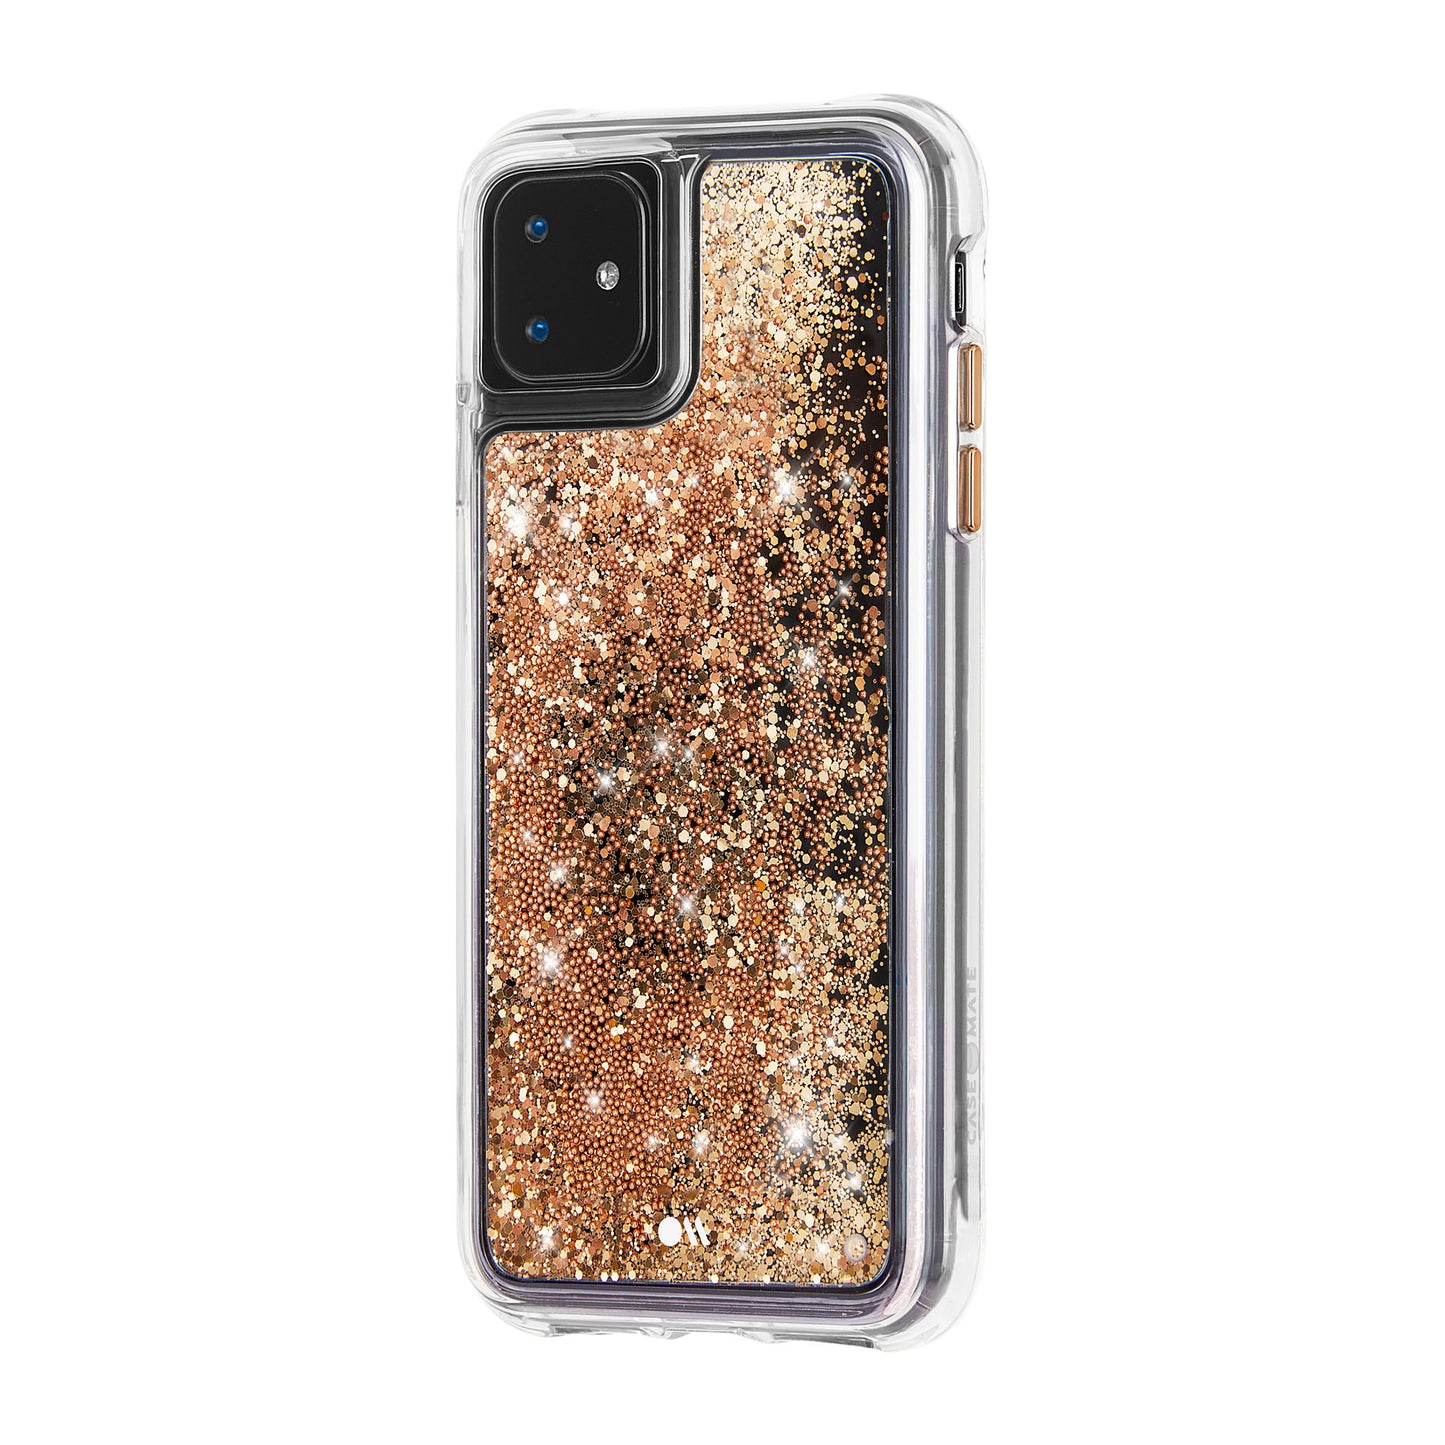 iPhone 11/XR Case-Mate Gold Waterfall Case - 15-05110